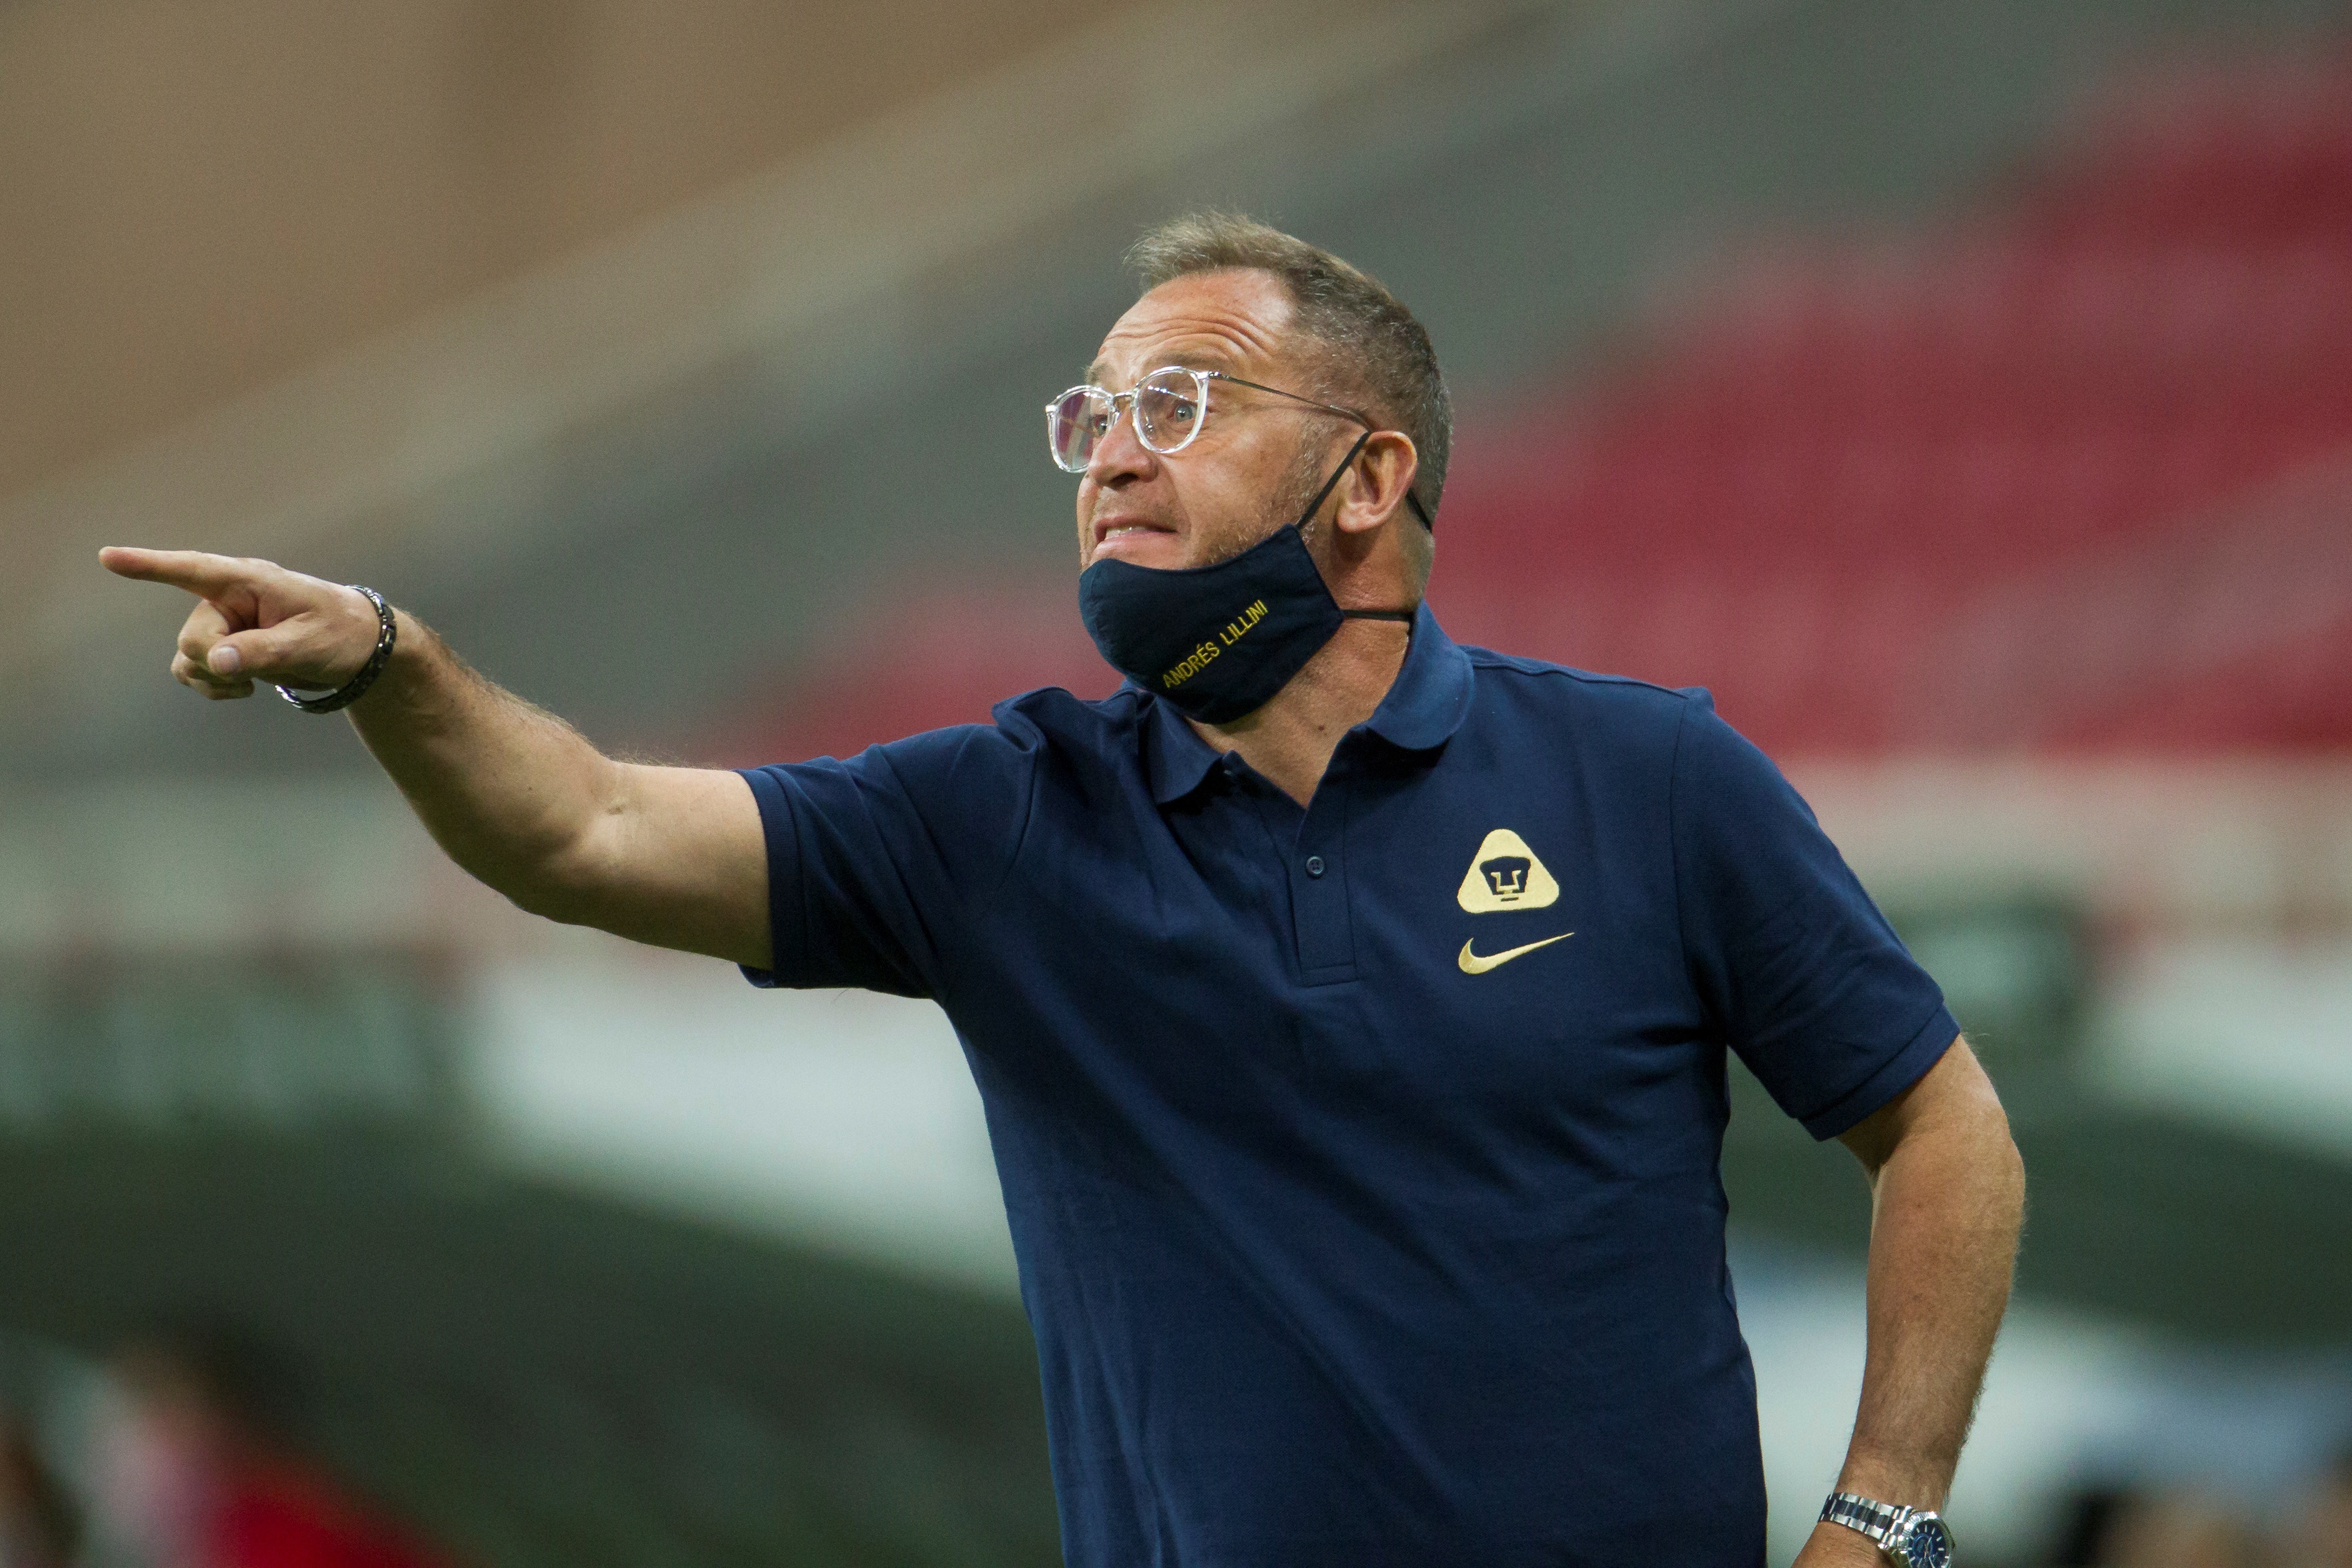 As coach of the UNAM Pumas first team, Andrés Lillini has managed to play in league finals and Concachampions without having obtained the crown (Photo: Francisco Guasco/EFE)